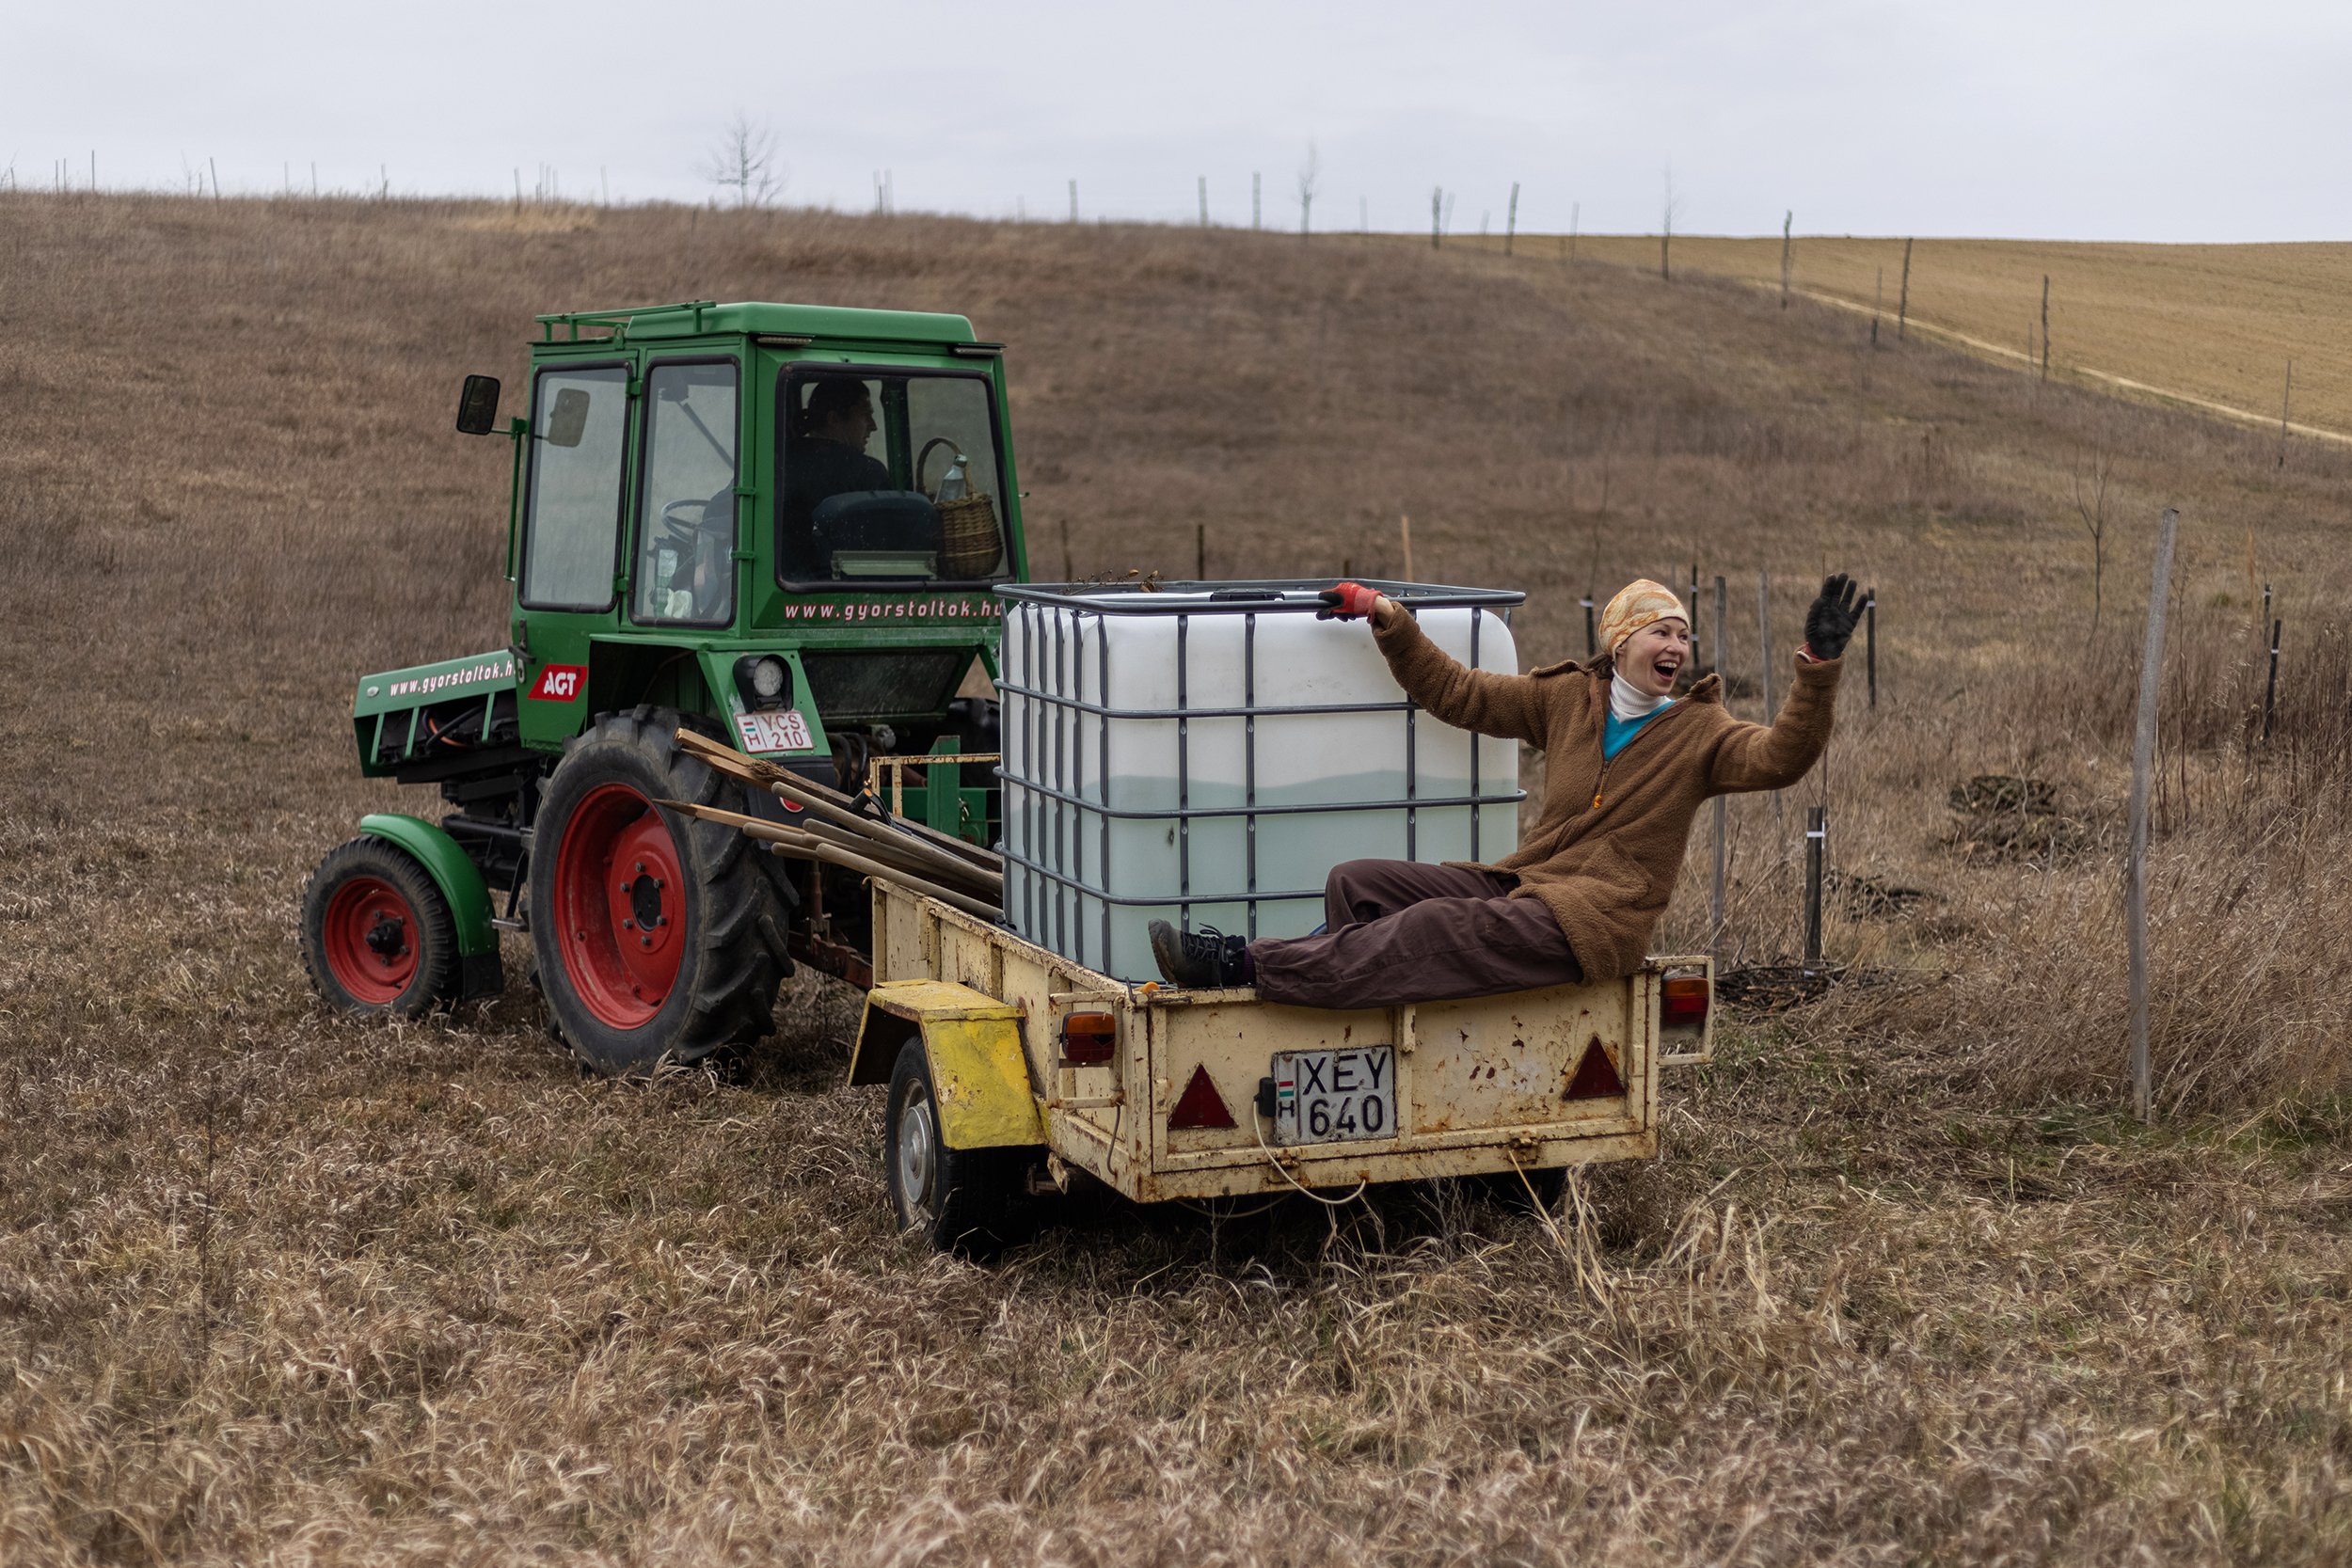  Cili jumping on the electric tractor as a stowaway on the Eco-meadow in Nyim, on March 13, 2022. Gergő, a member of the community, built the engine of a small electric car into his existing work machine. The vehicle – as part of a sustainable system